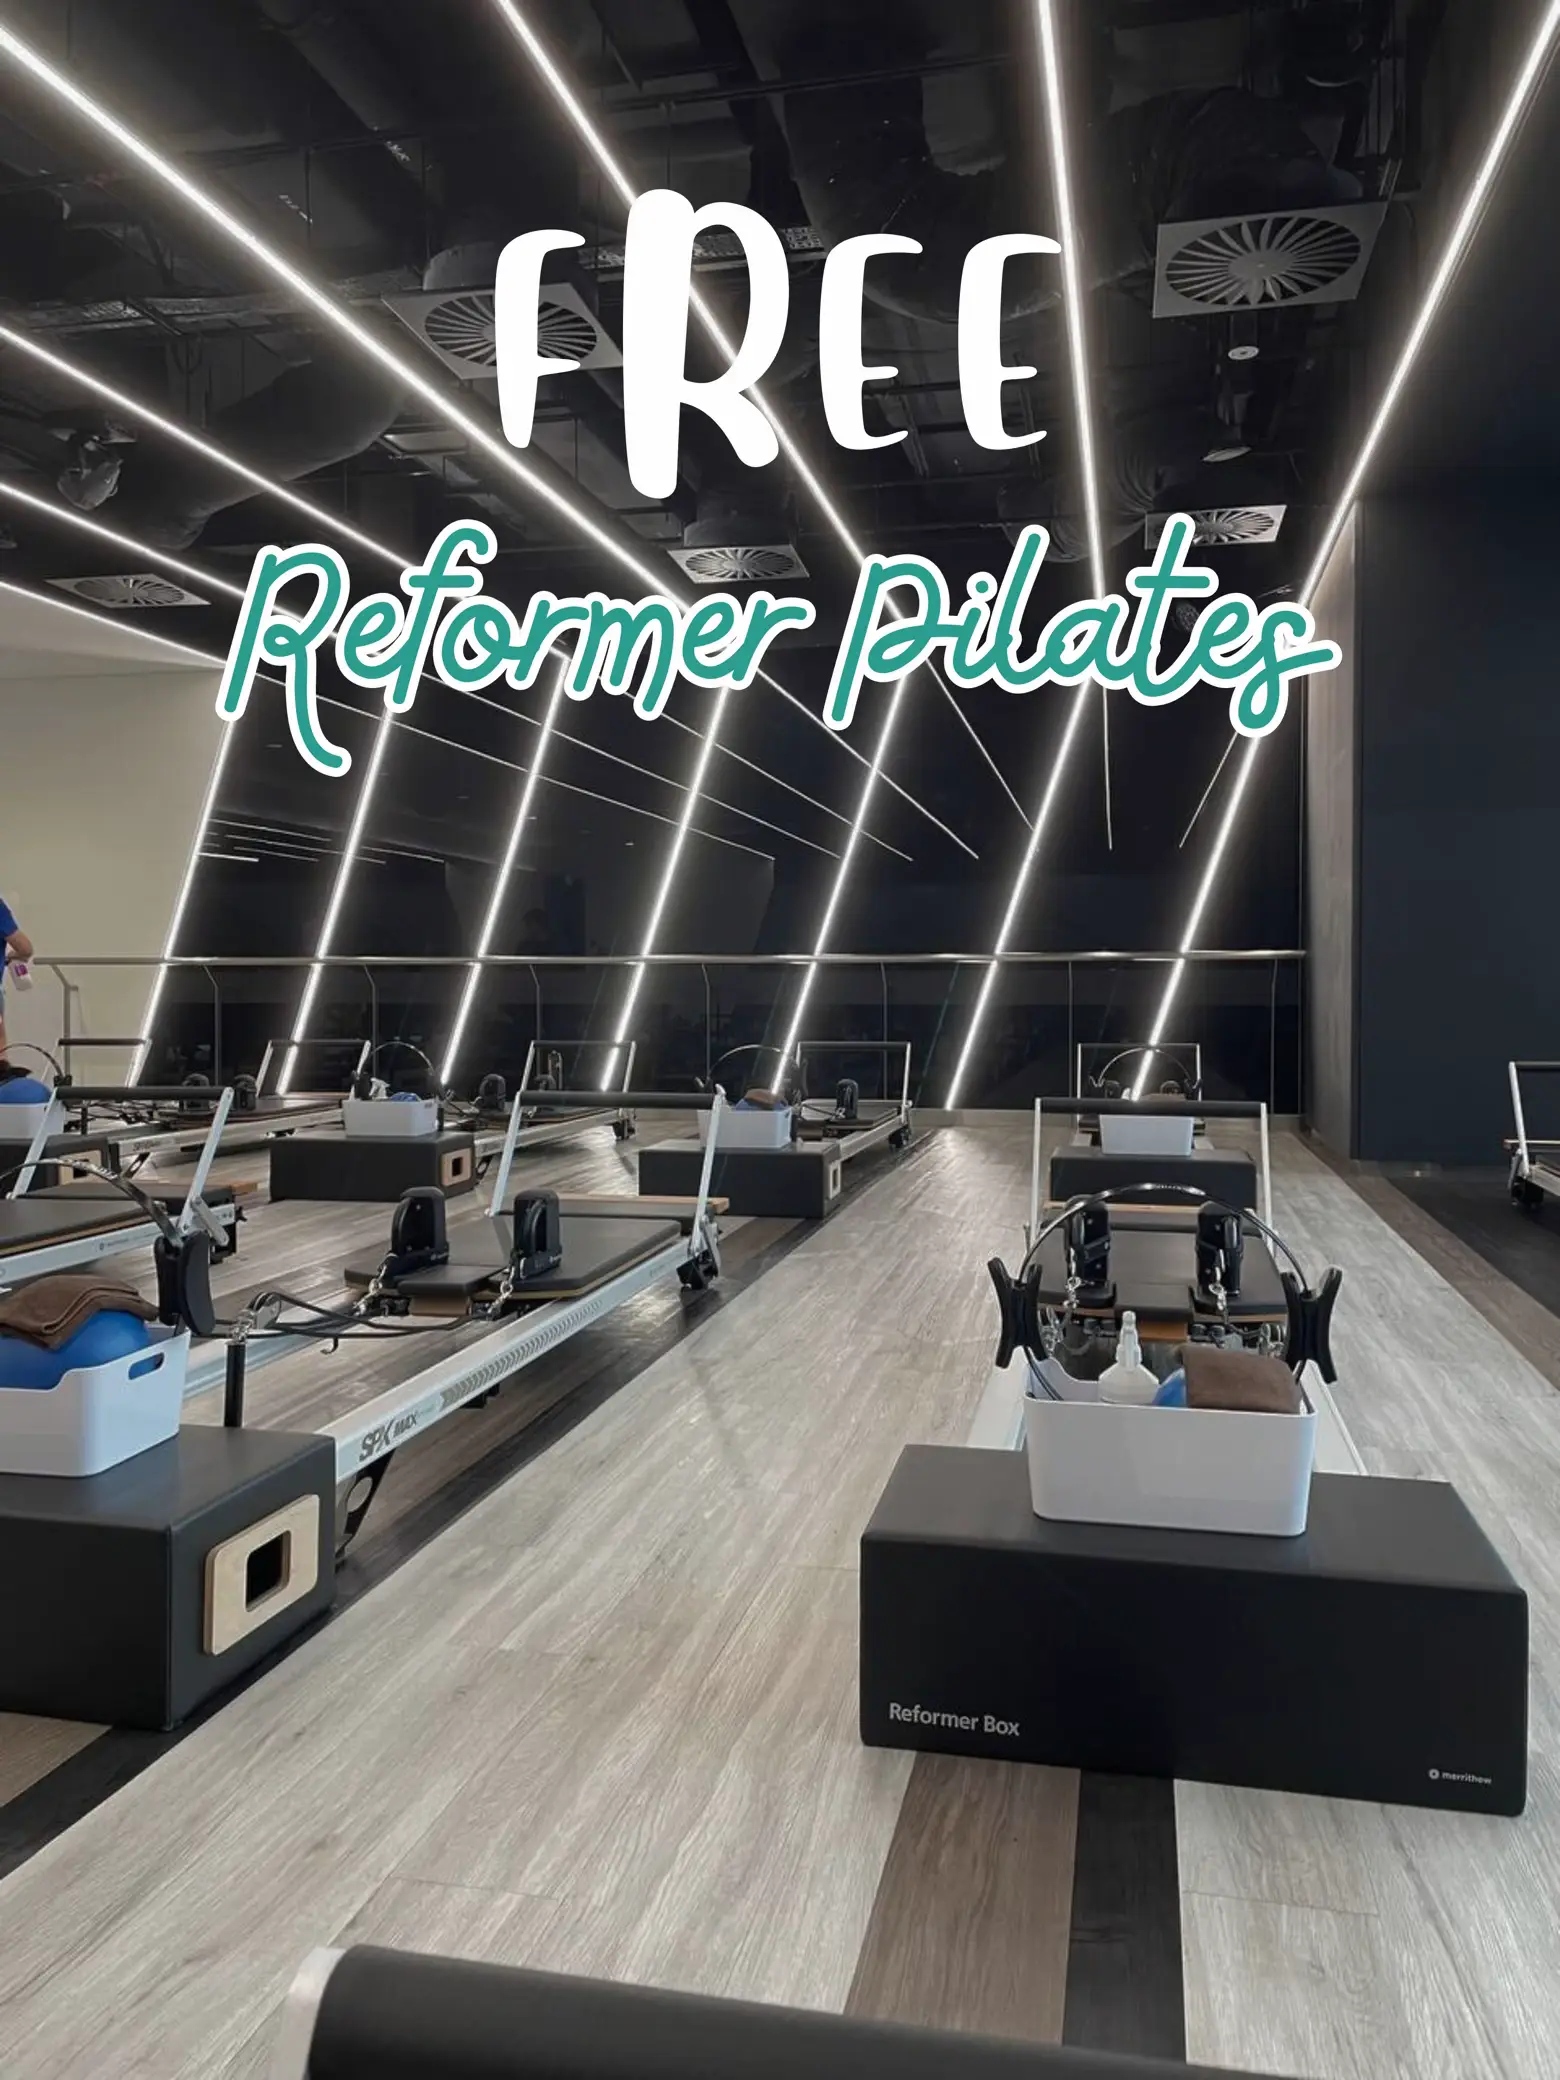 Club Pilates - Introducing the world's first EVER Reformer Towel